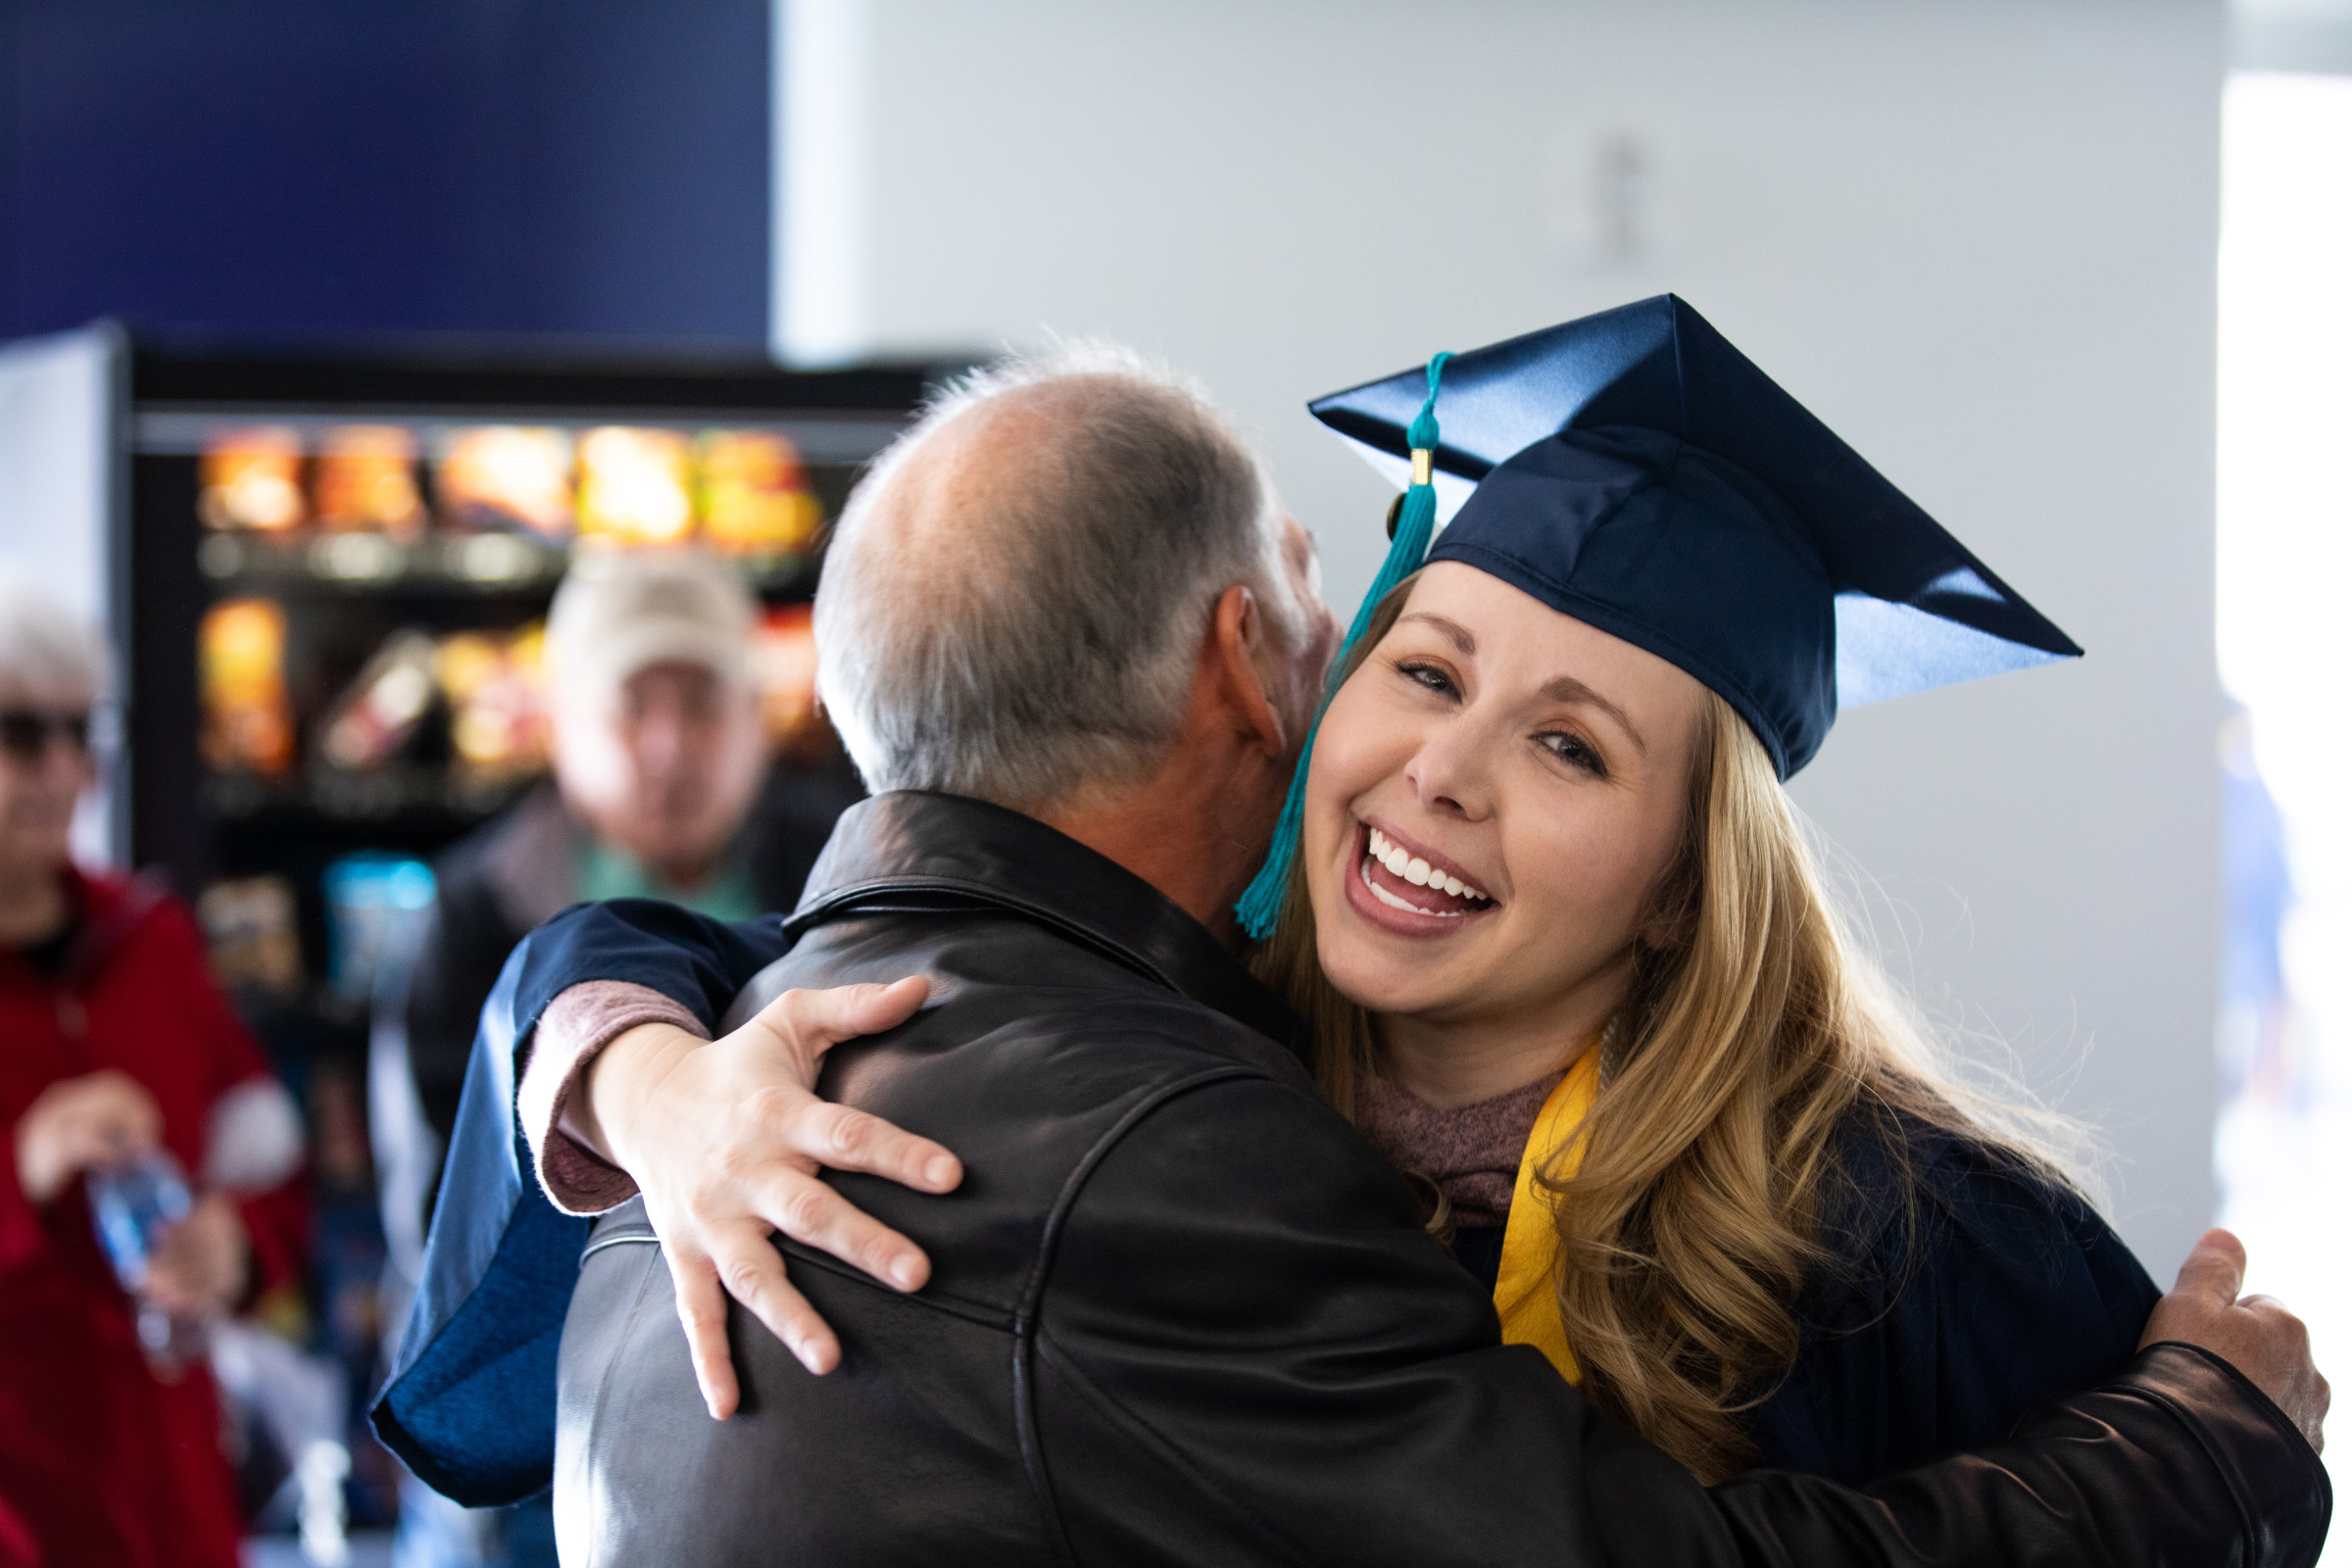 A smiling young woman in graduation regalia embraces a family member.